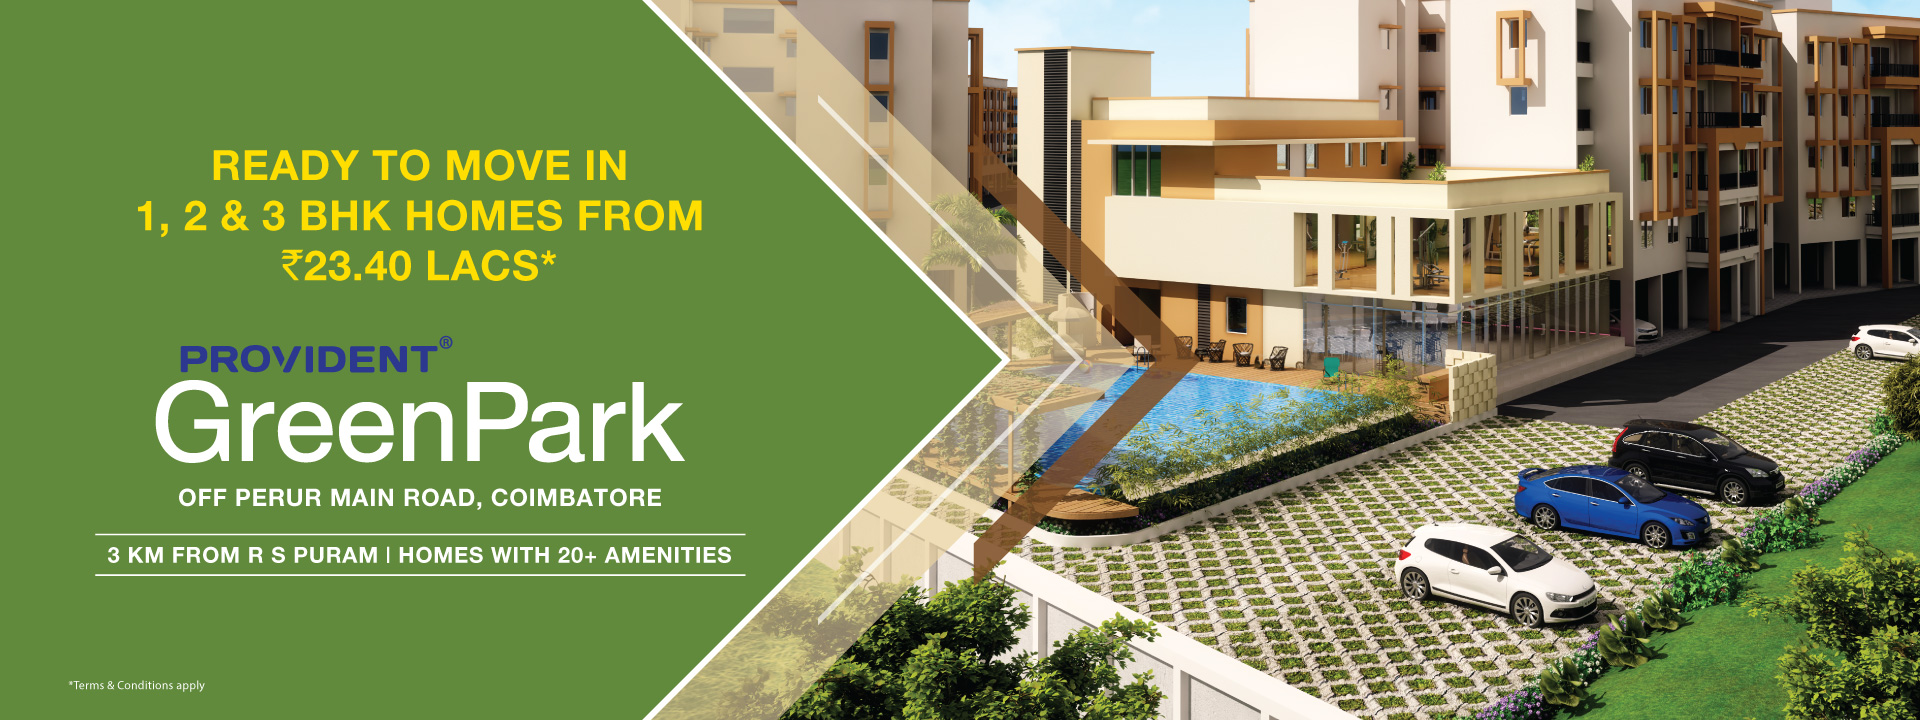 Apartments starting from Rs 23.40 Lakh at Provident Green Park in Coimbatore Update